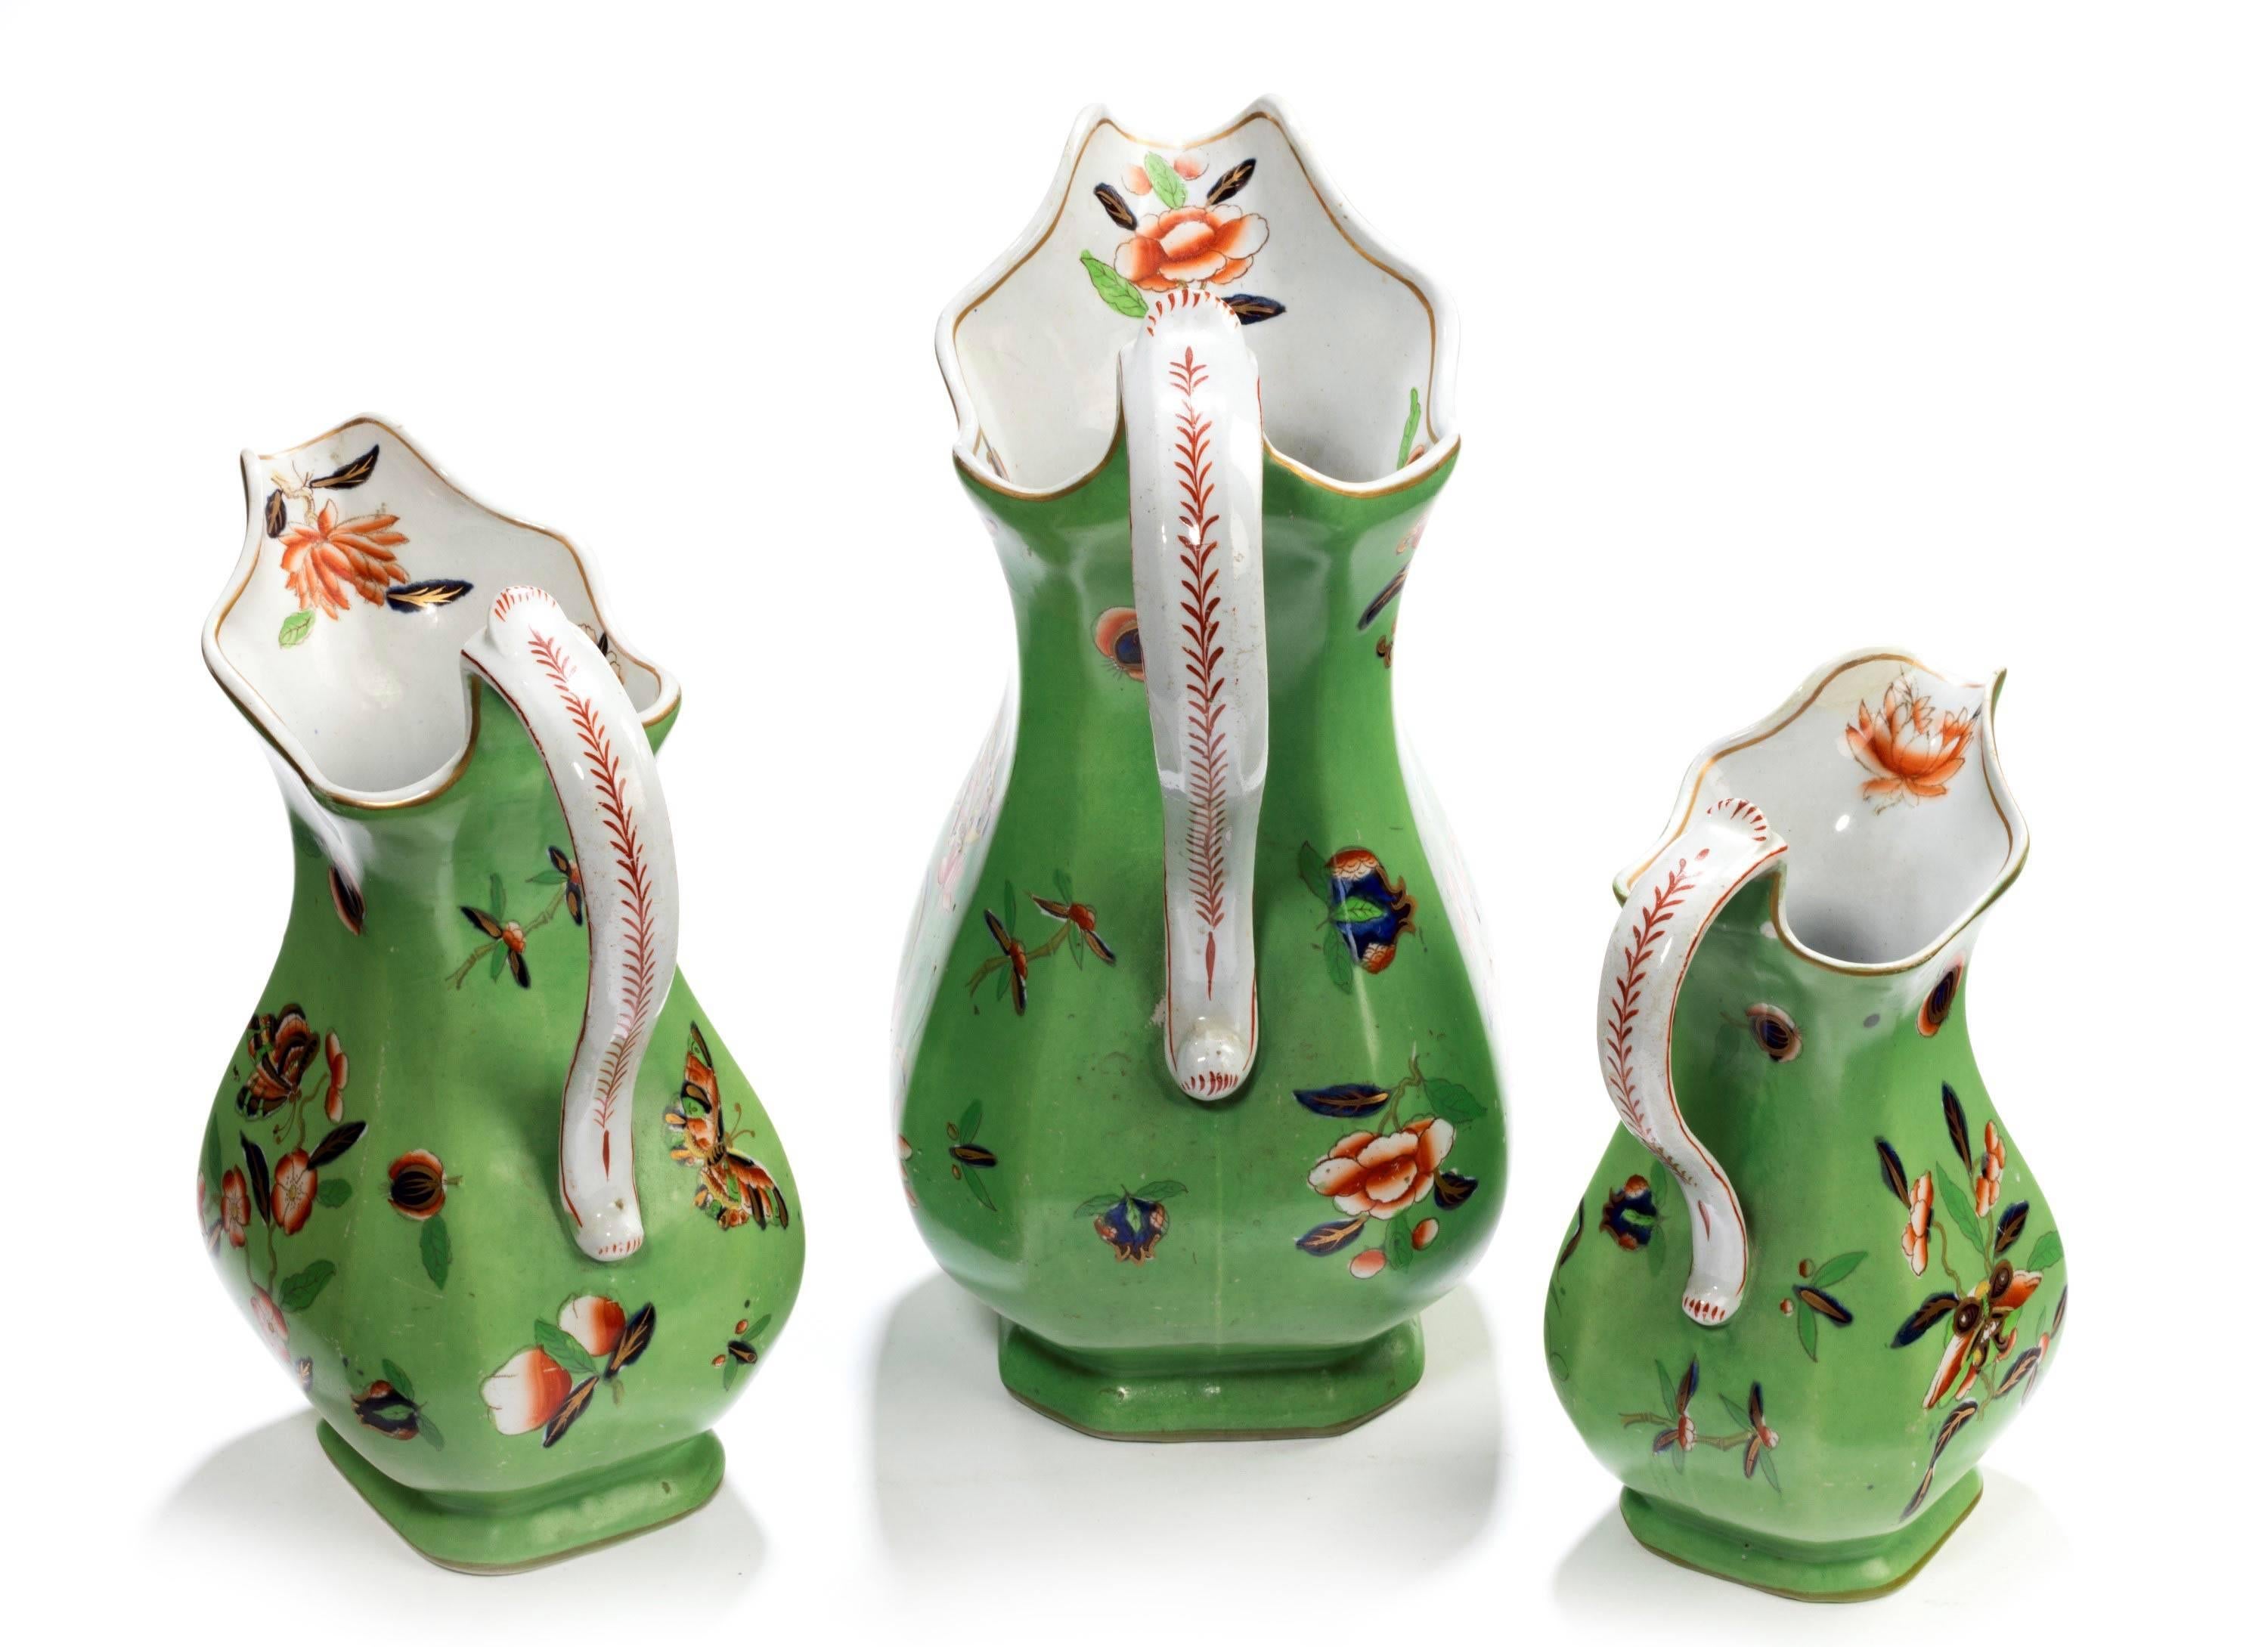 A particularly good set of three graduated Staffordshire jugs. With solid green background decorated with fans, foliage and oriental flowers. 

The medium sized -

Height 8 inches
Width 6 inches 
Depth 3.5 inches

The smallest -

Height 7